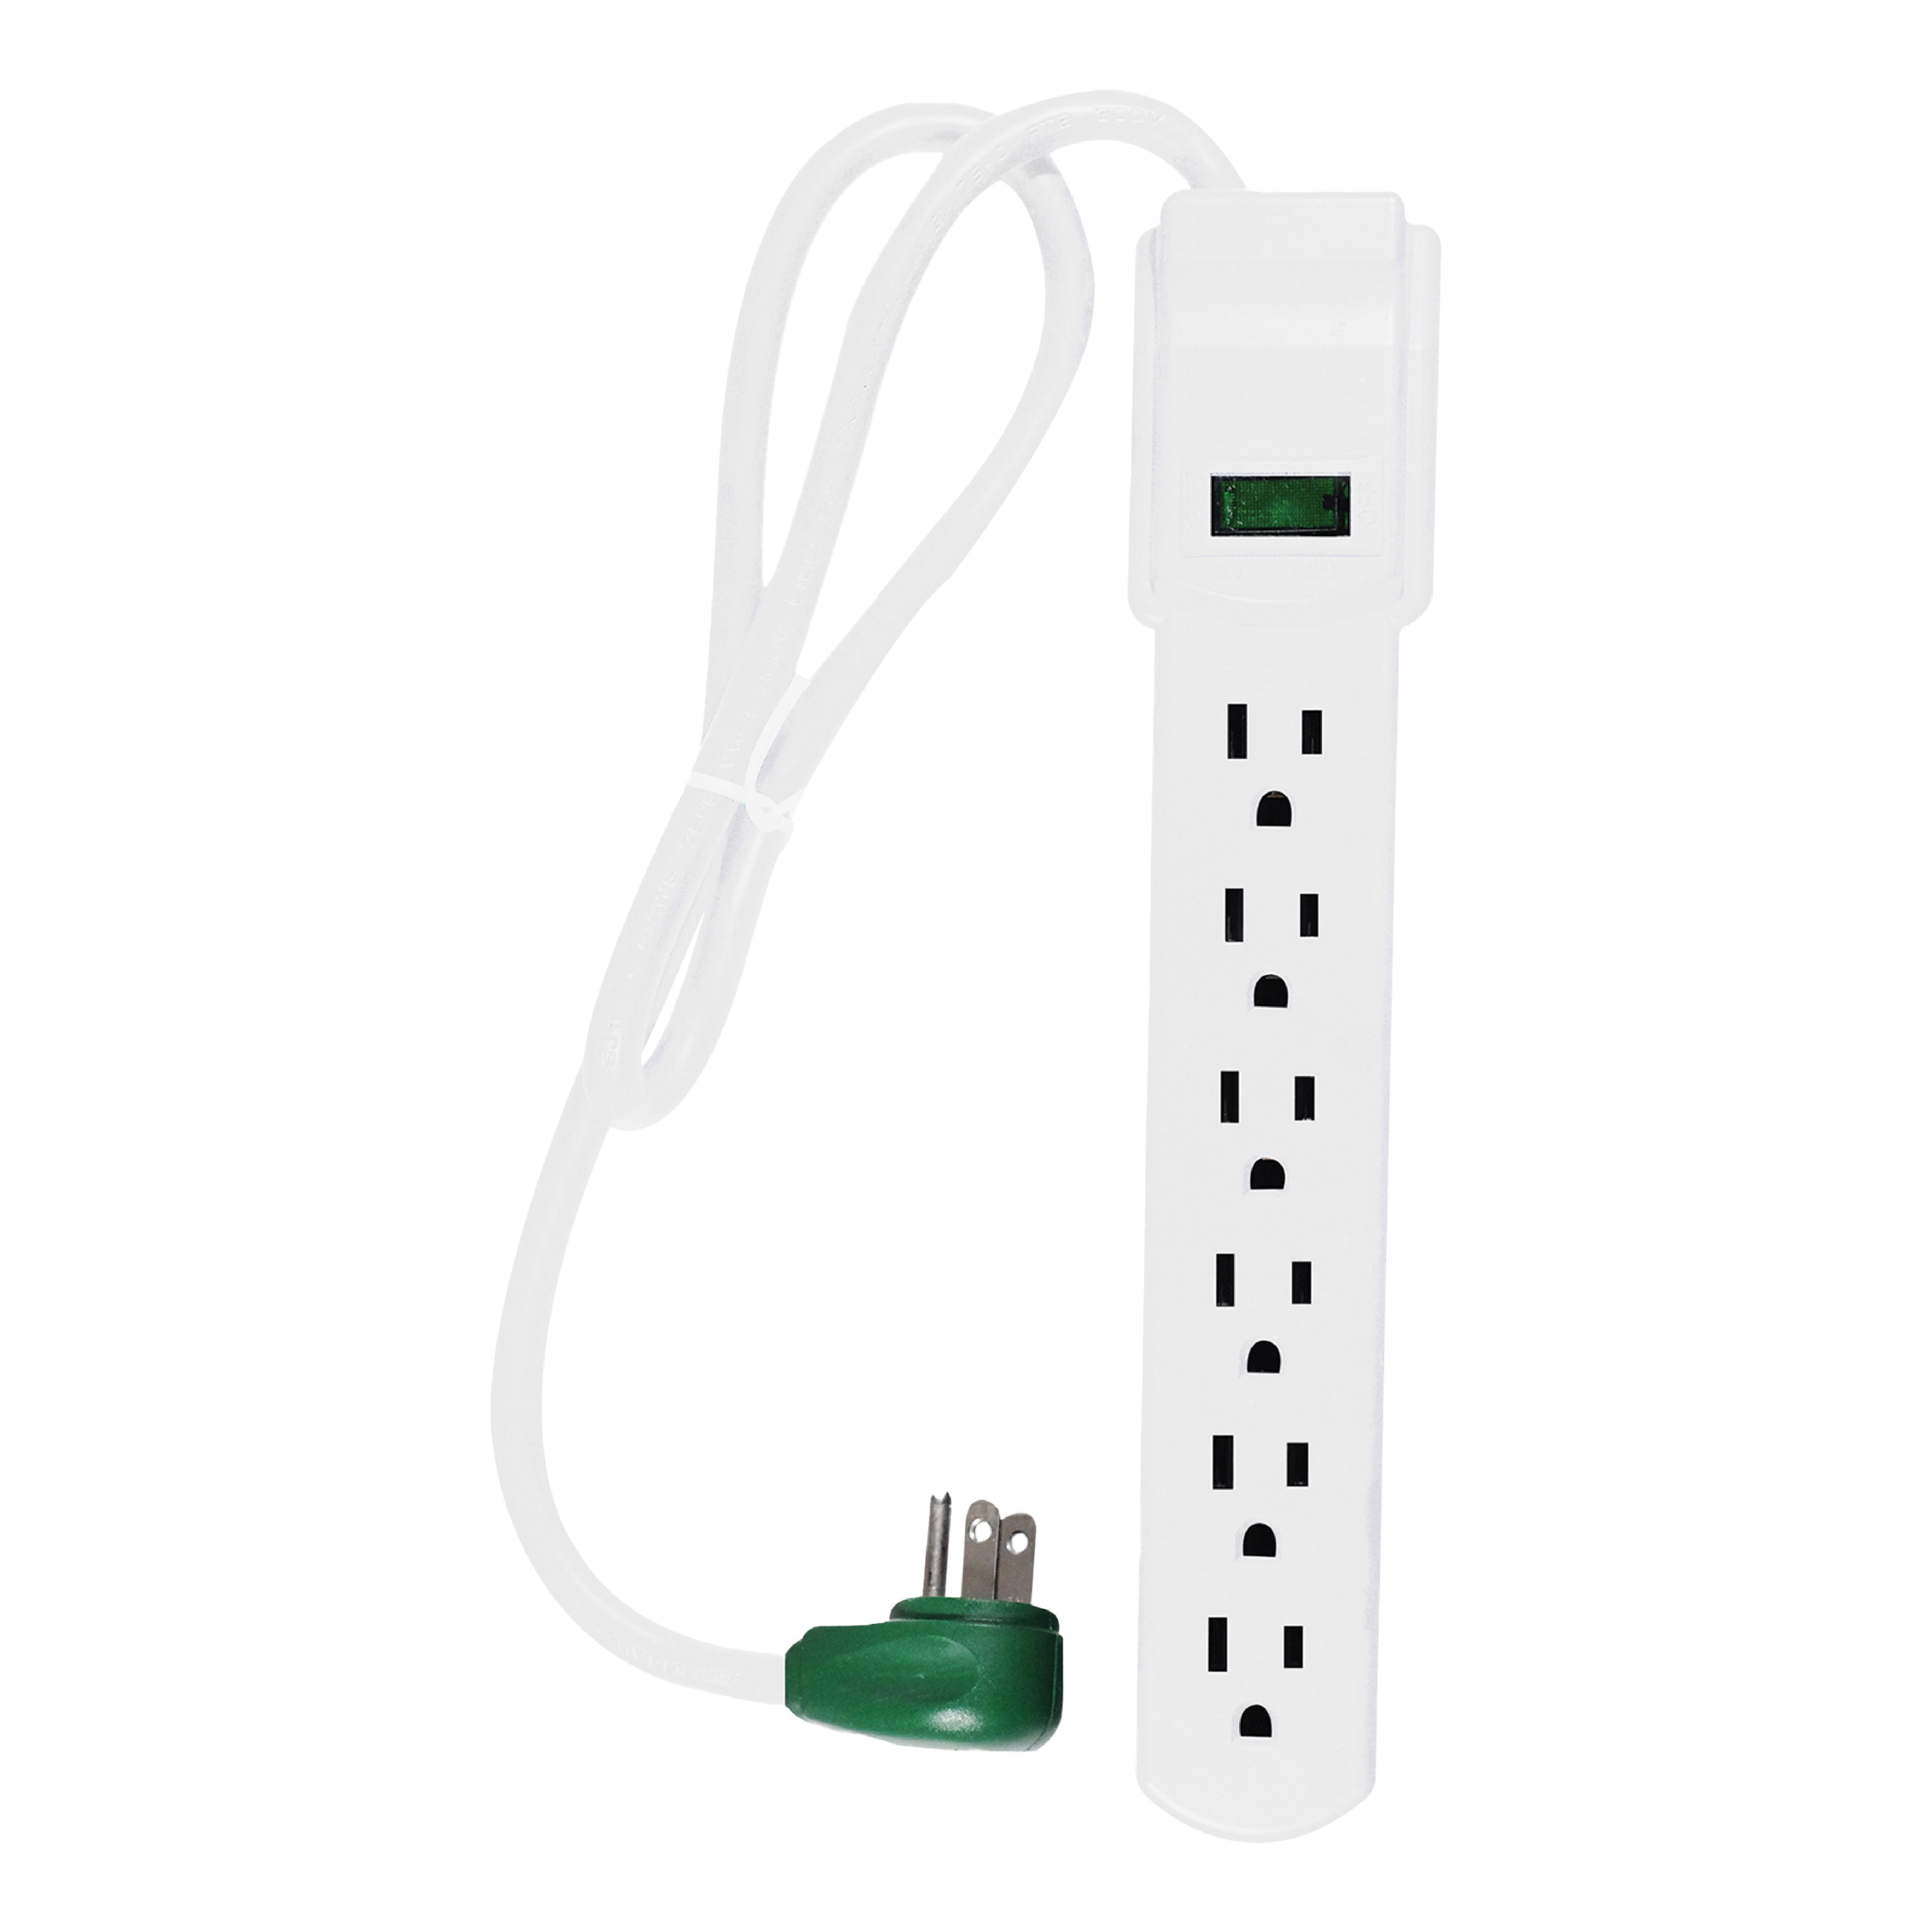 GoGreen Power 6-Outlet Surge Protector for $3.26